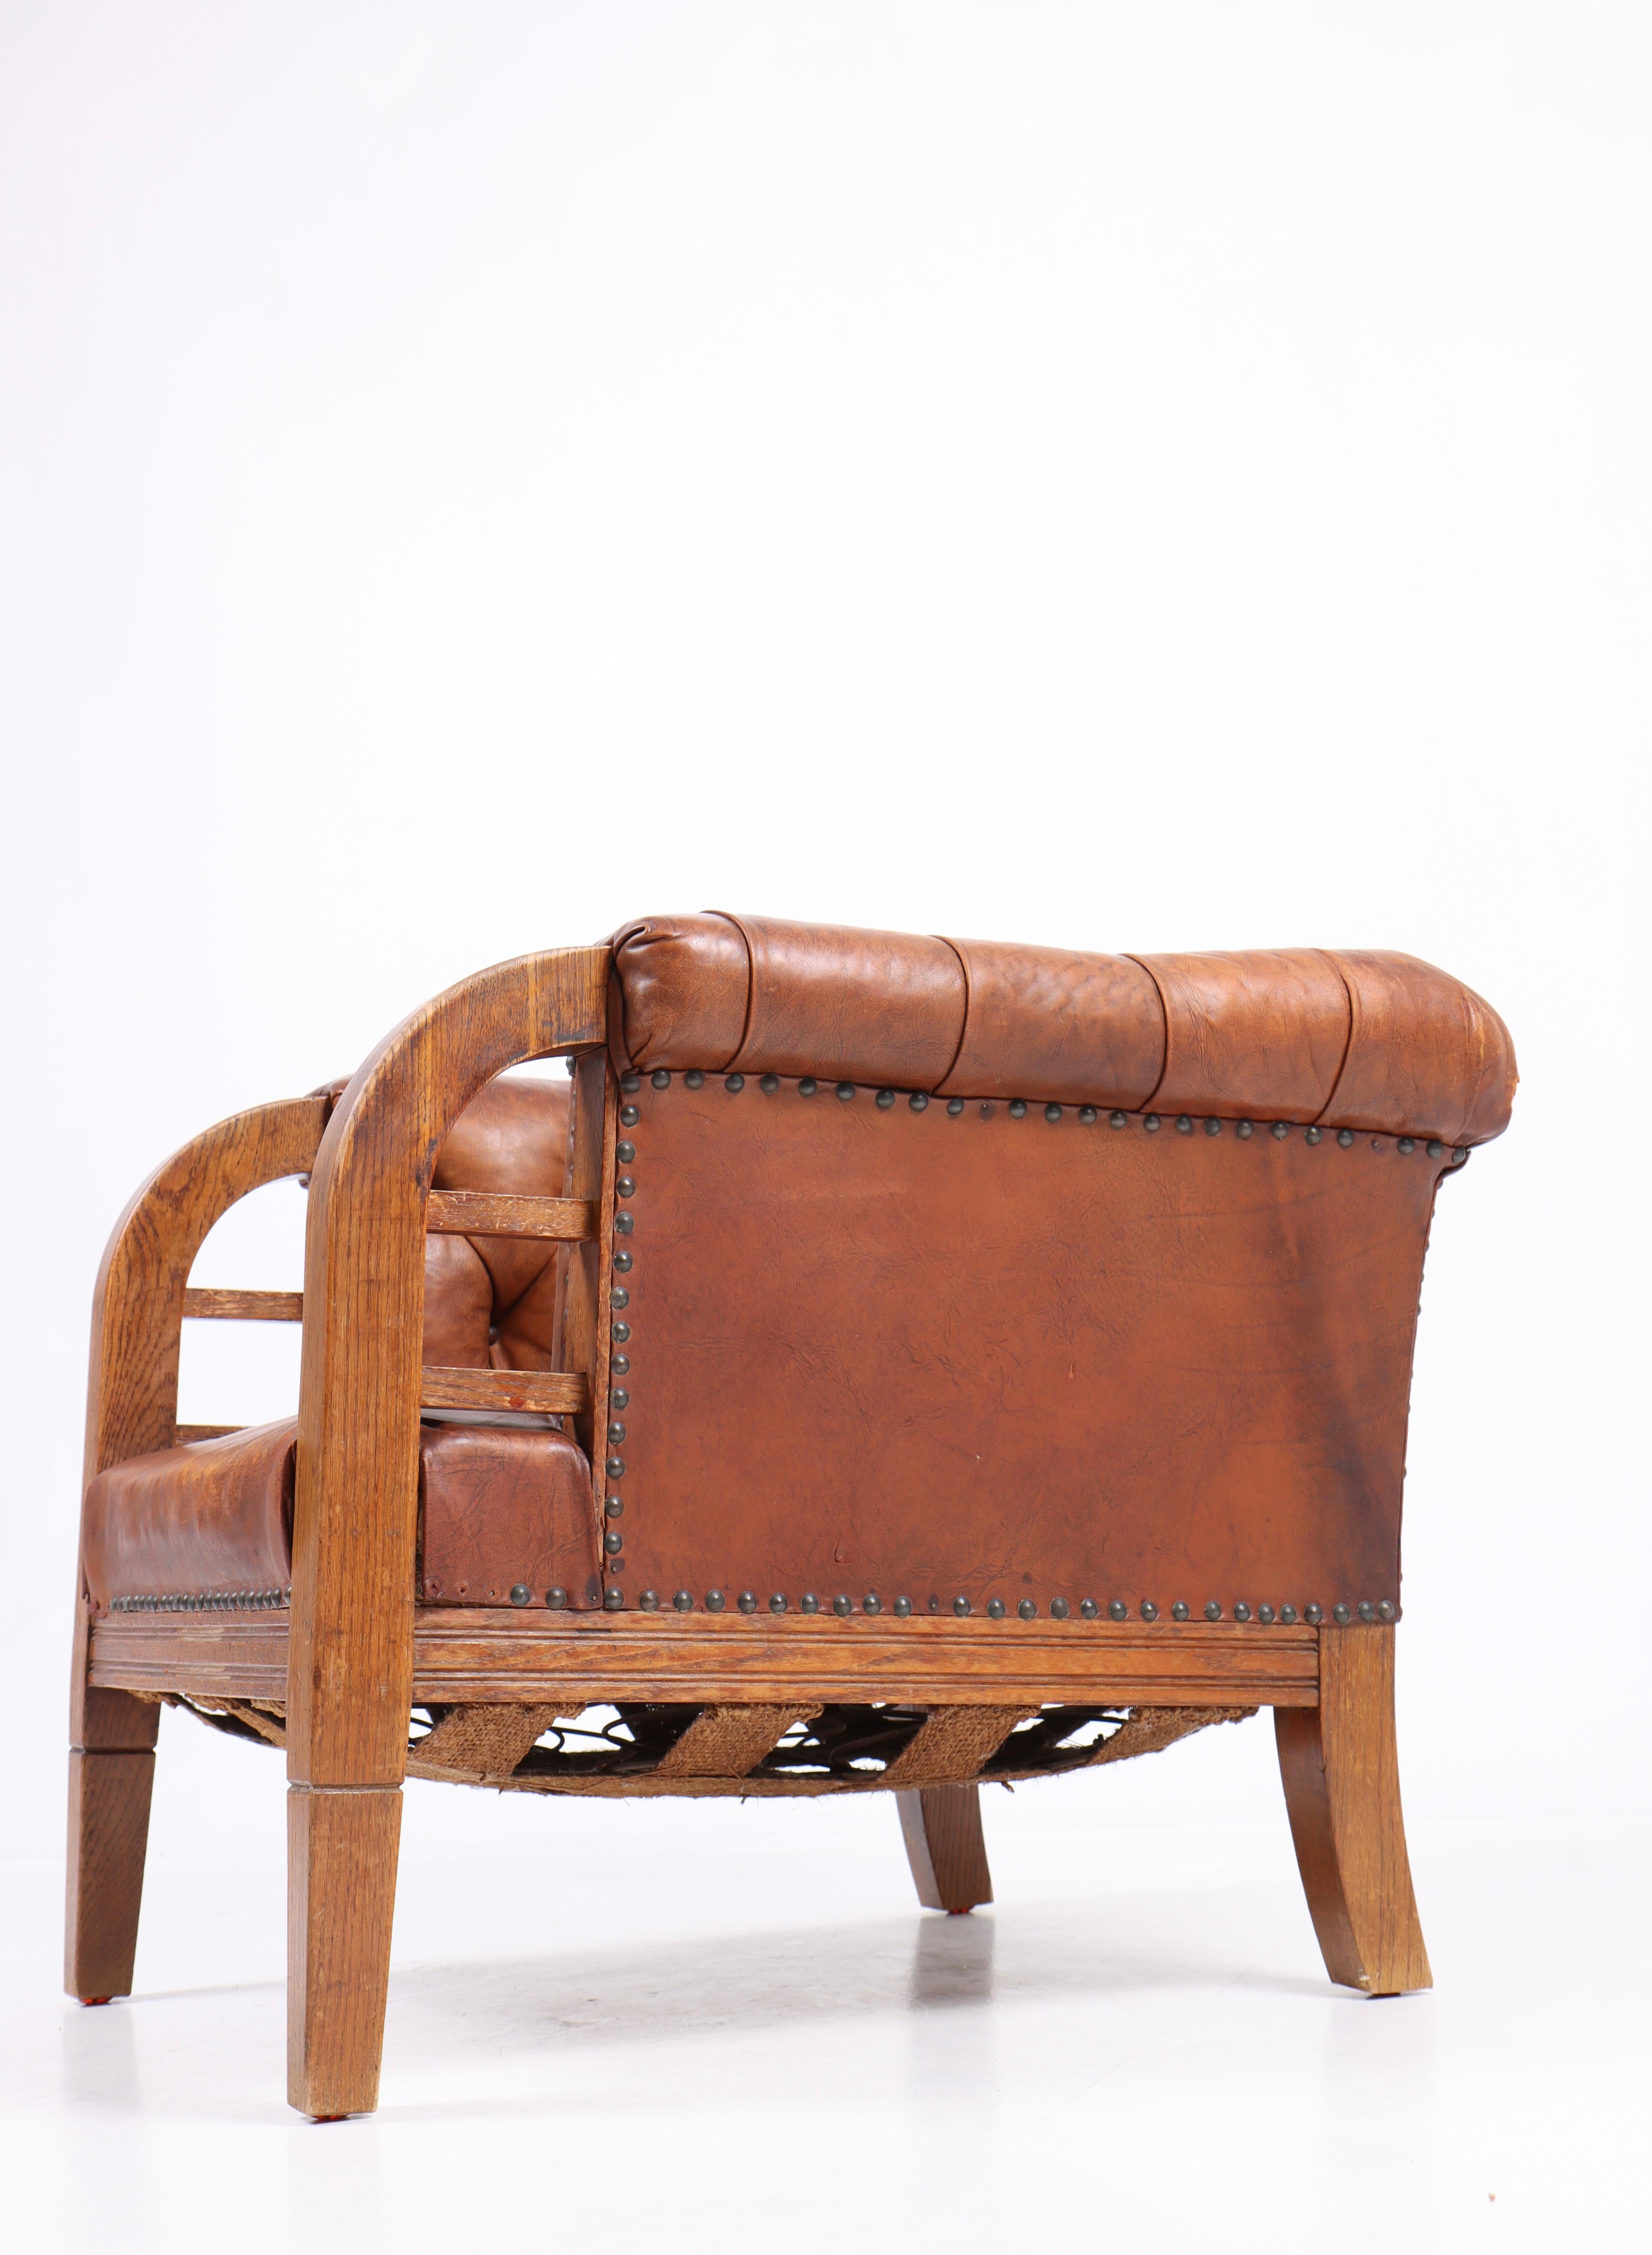 Scandinavian Modern Lounge Chair in Patinated Leather, Made in Denmark, 1940s For Sale